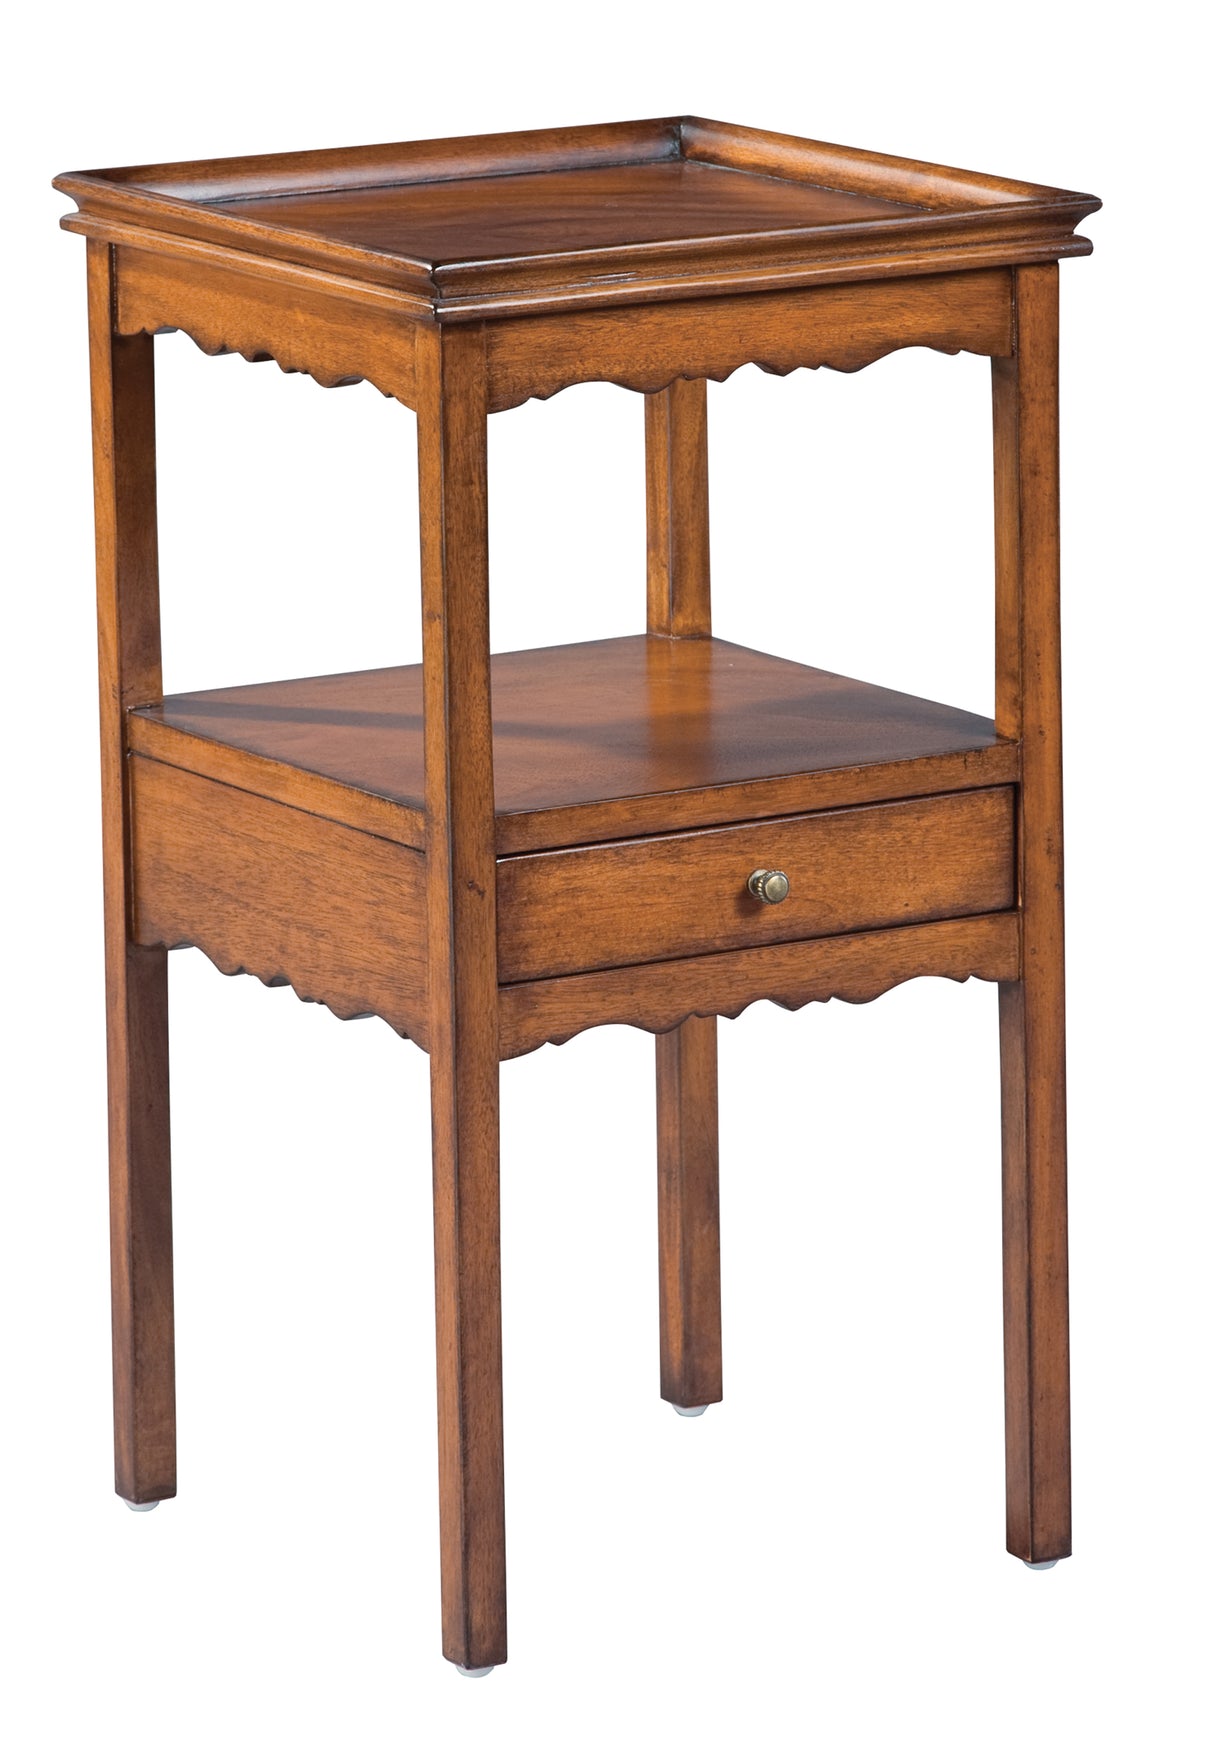 Hekman 81063 Accents 15in. x 15in. x 27.5in. End Table